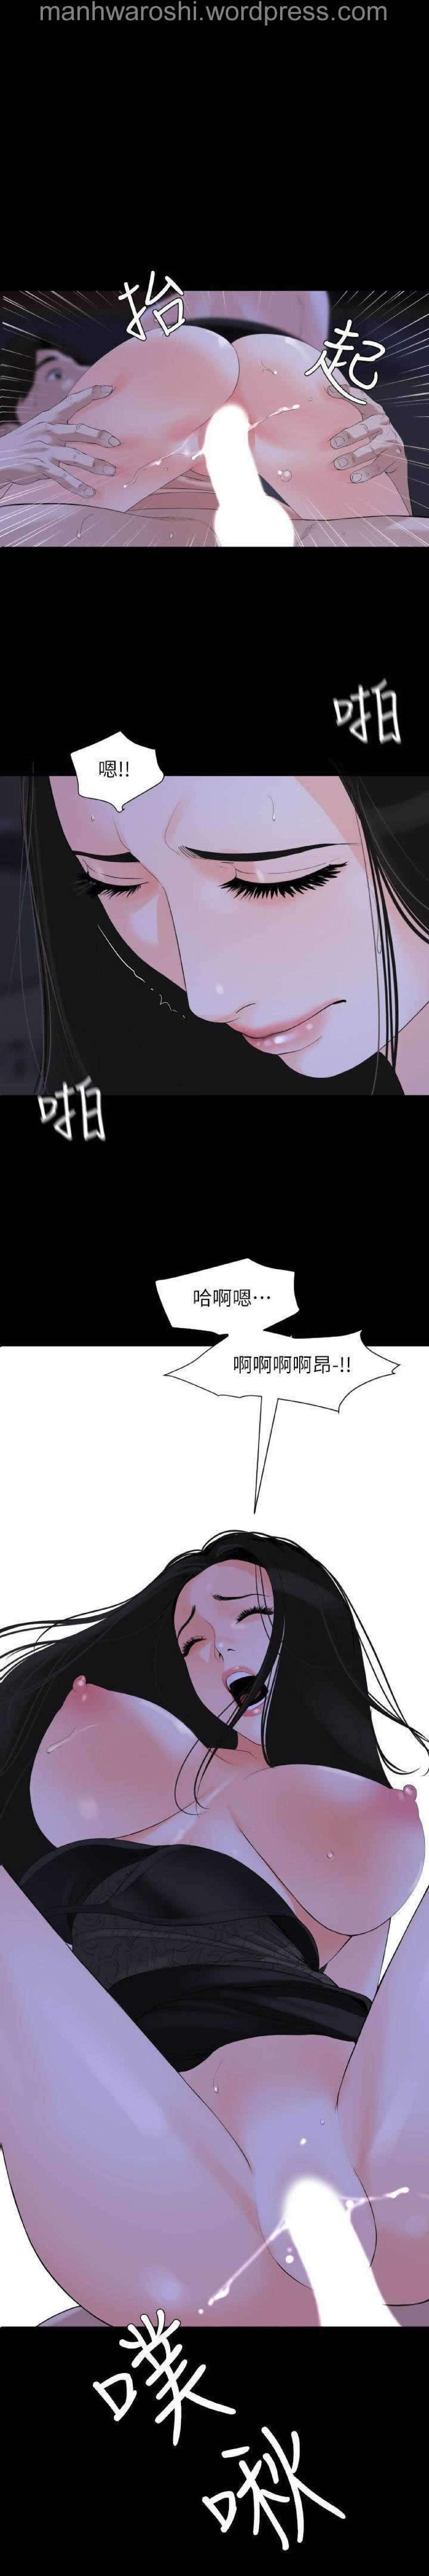 Don’t Be Like This! Son-In-Law | 与岳母同屋 第 6 [Chinese] Manhwa 1